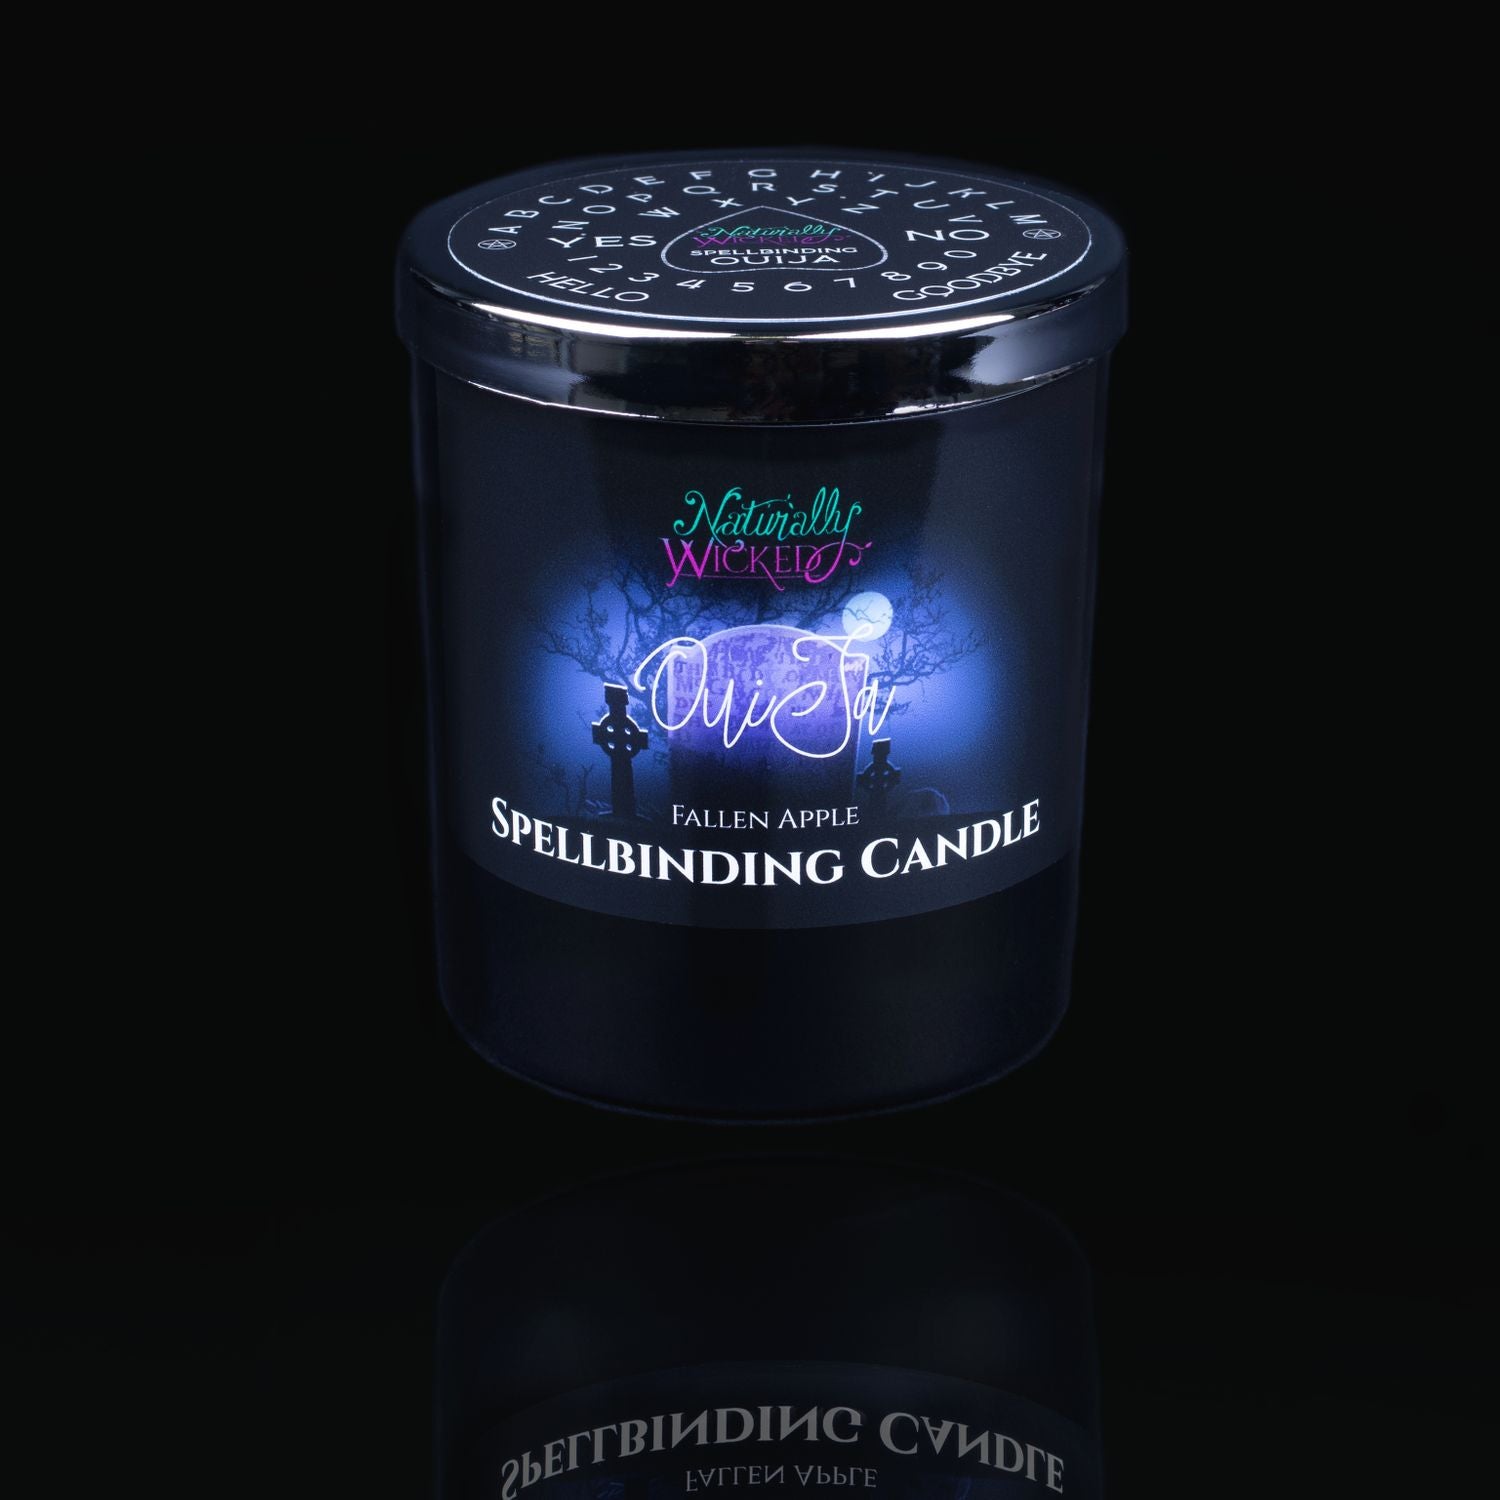 Naturally Wicked Spellbinding Ouija Spell Candle With Mirror Finished Exquisite Lid In Place. Featuring A Black Gloss Label And A Spooky Graveyard Design. A Unique Gift For Dark Souls